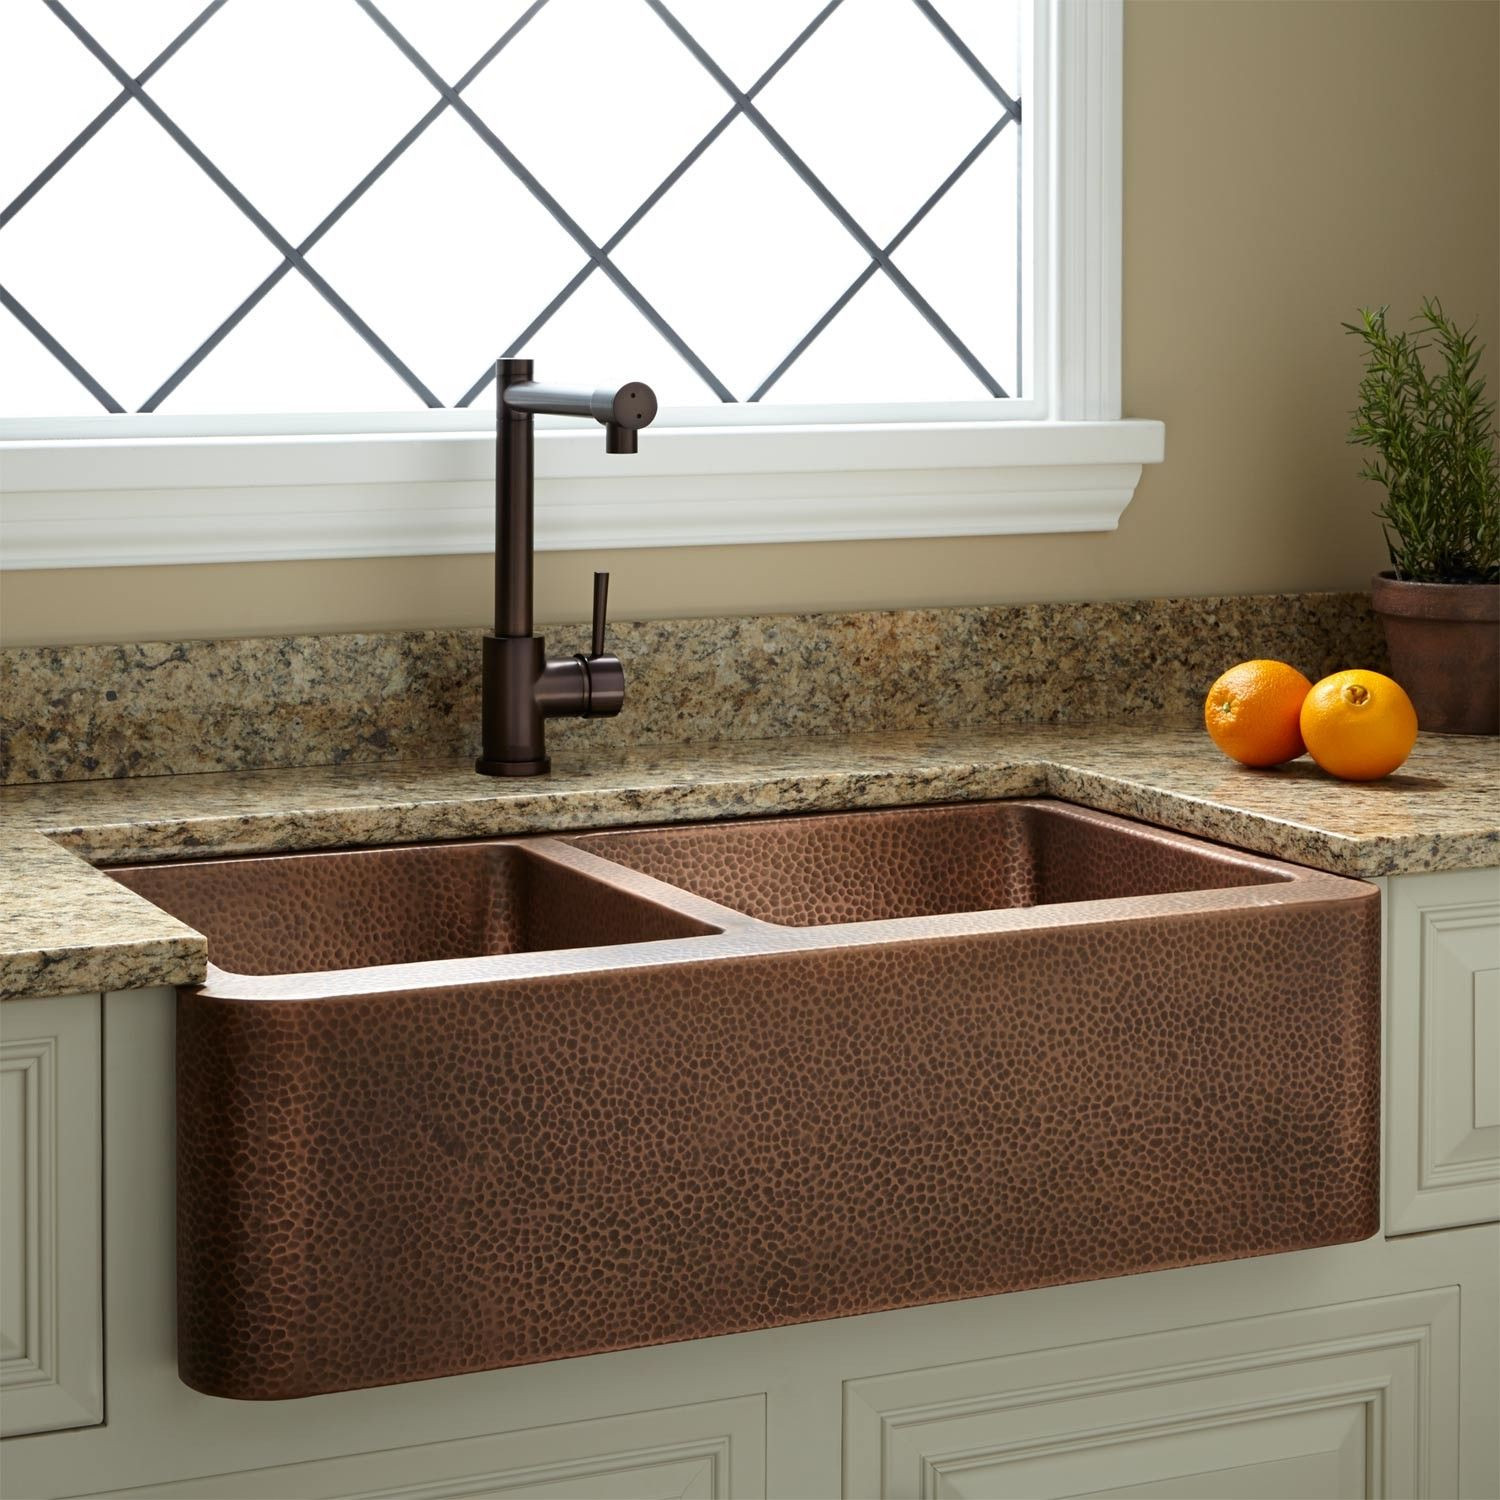 Small Double Kitchen Sink
 33" Hammered Copper 60 40 fset Double Bowl Farmhouse